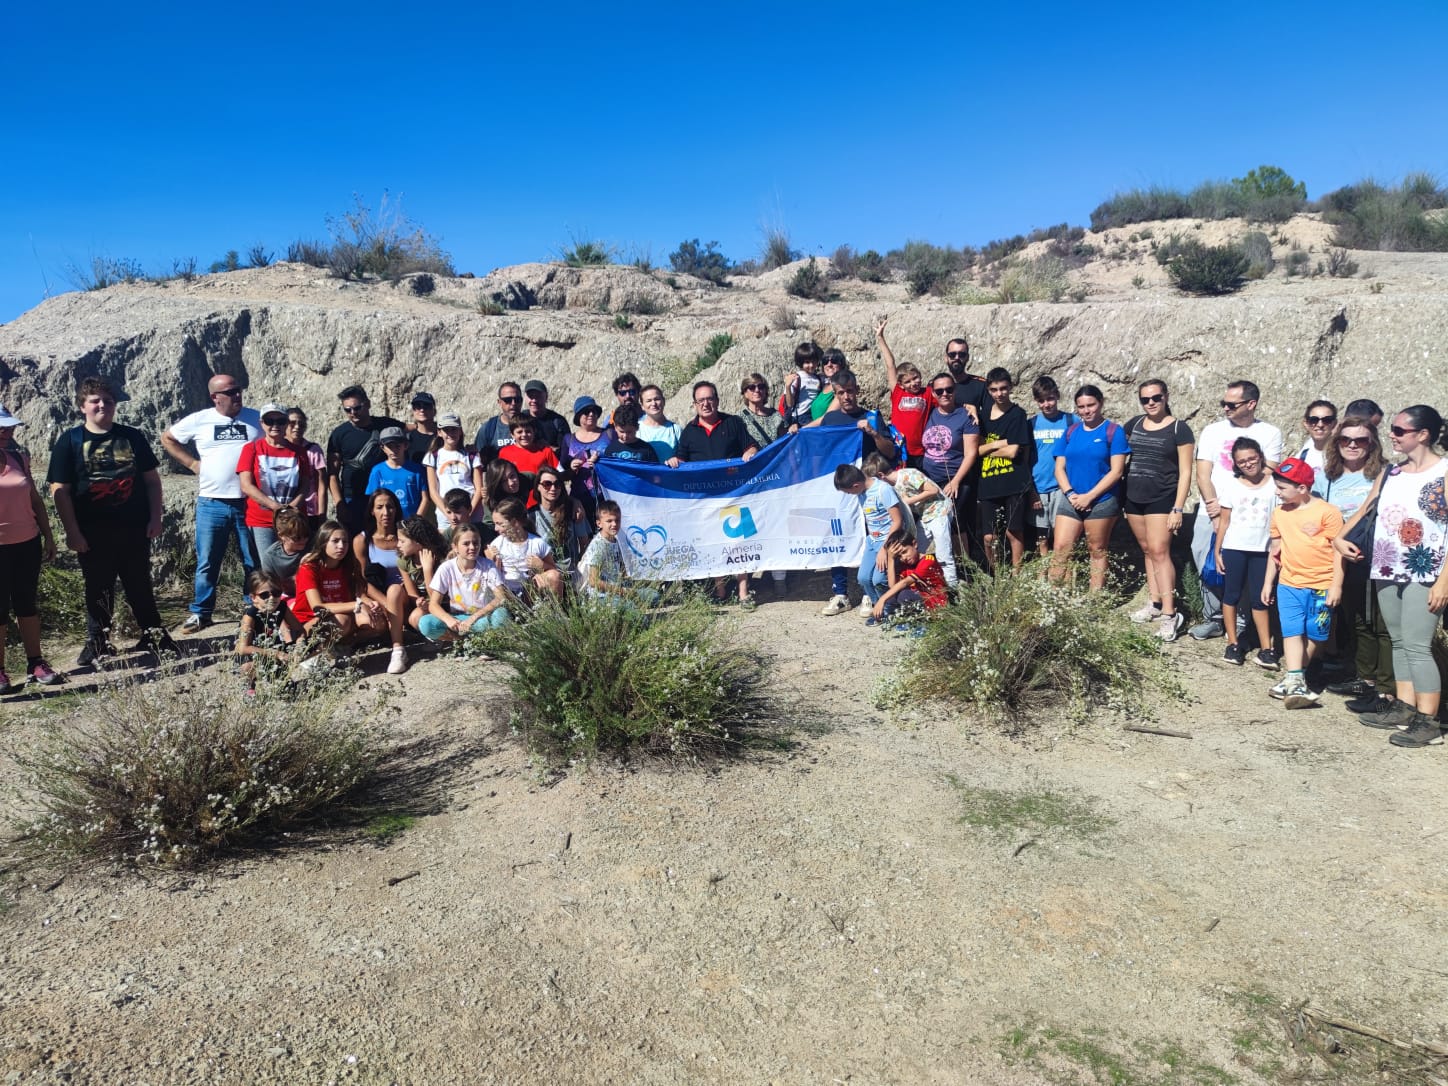 Mojácar Council’s Sports Department and the Almería Provincial Council, through its Multiaventura programme, organised a visit to the Sorbas caves, bringing together families and residents of the town.